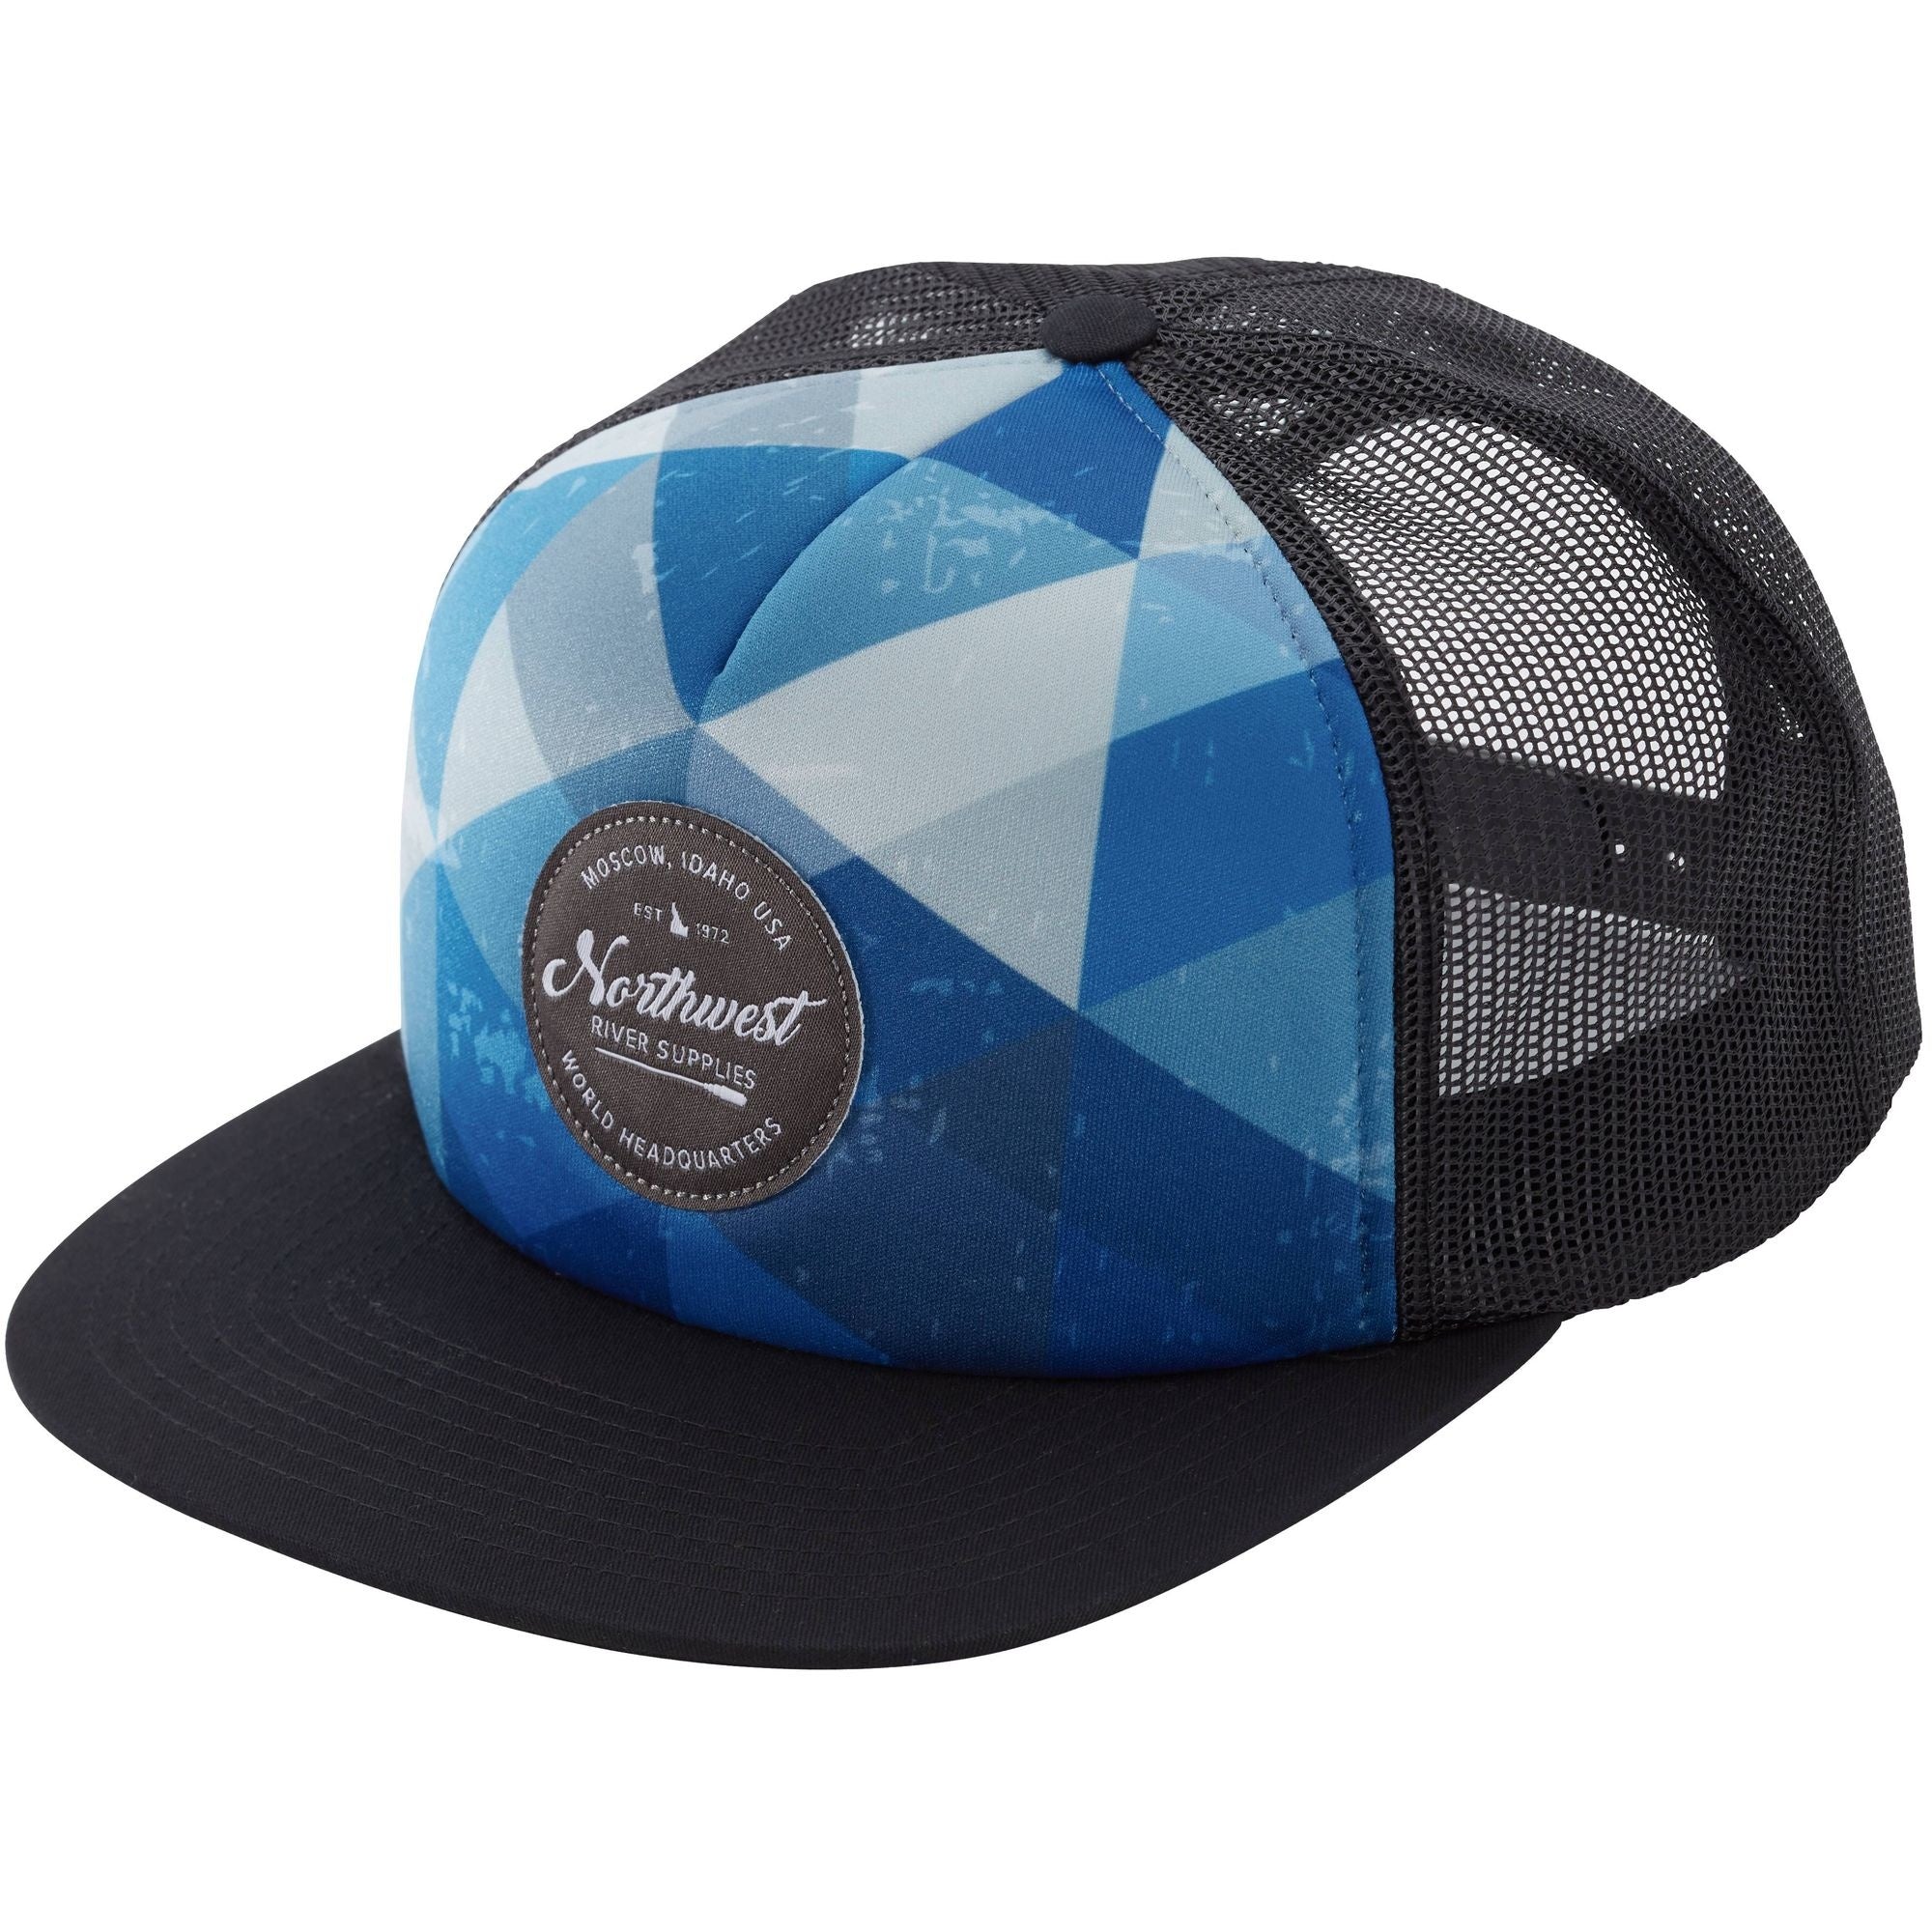 NRS - River Hat, Triangle Blue